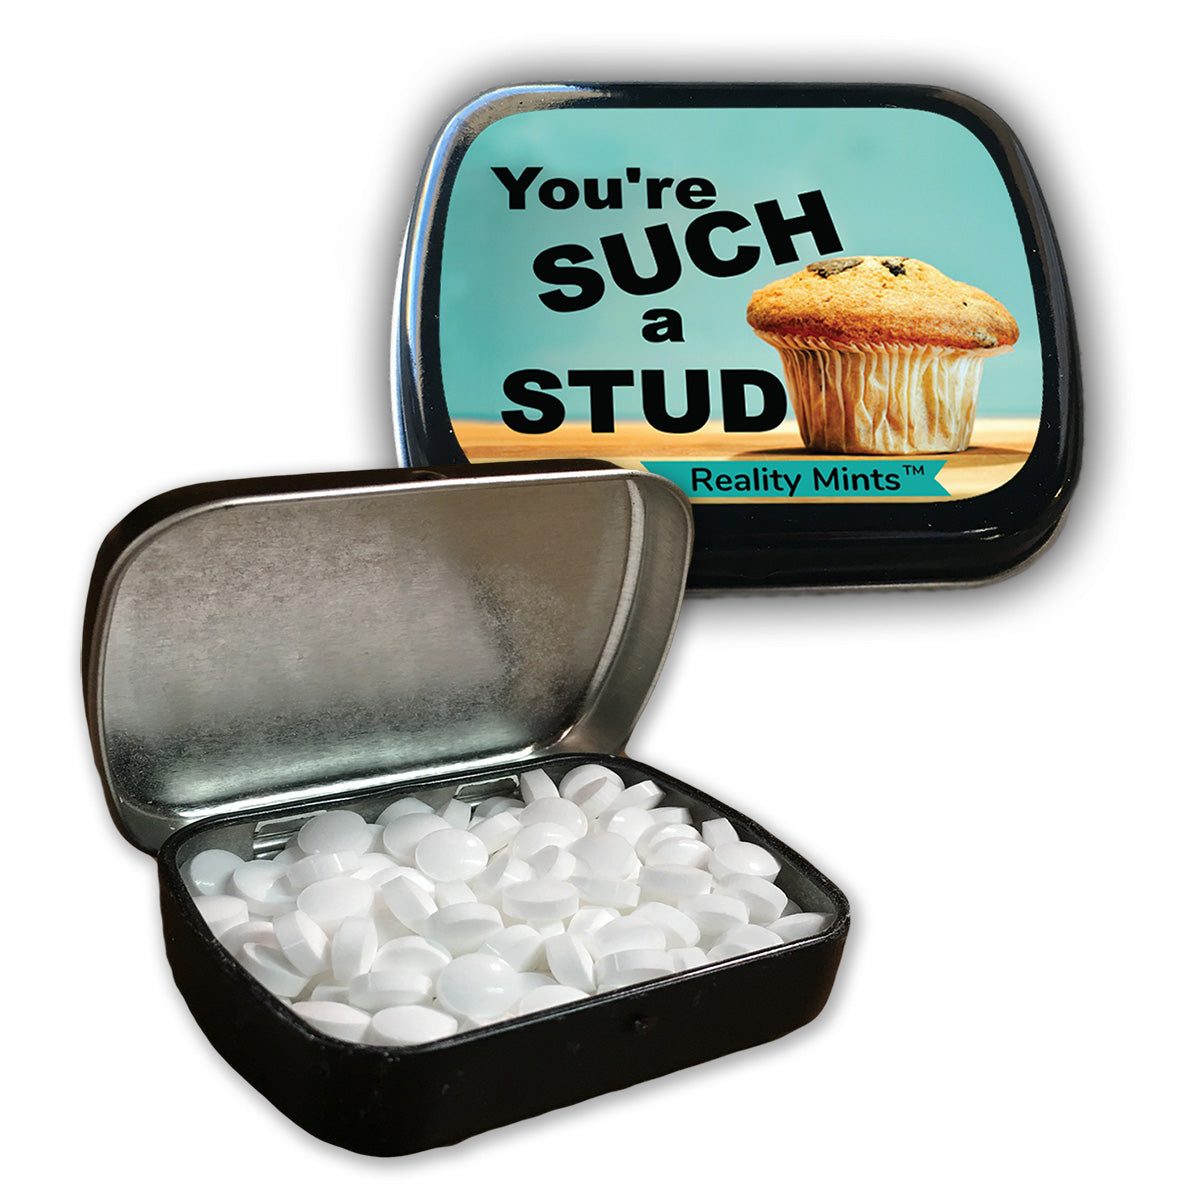 You're Such a Stud Muffin Mints